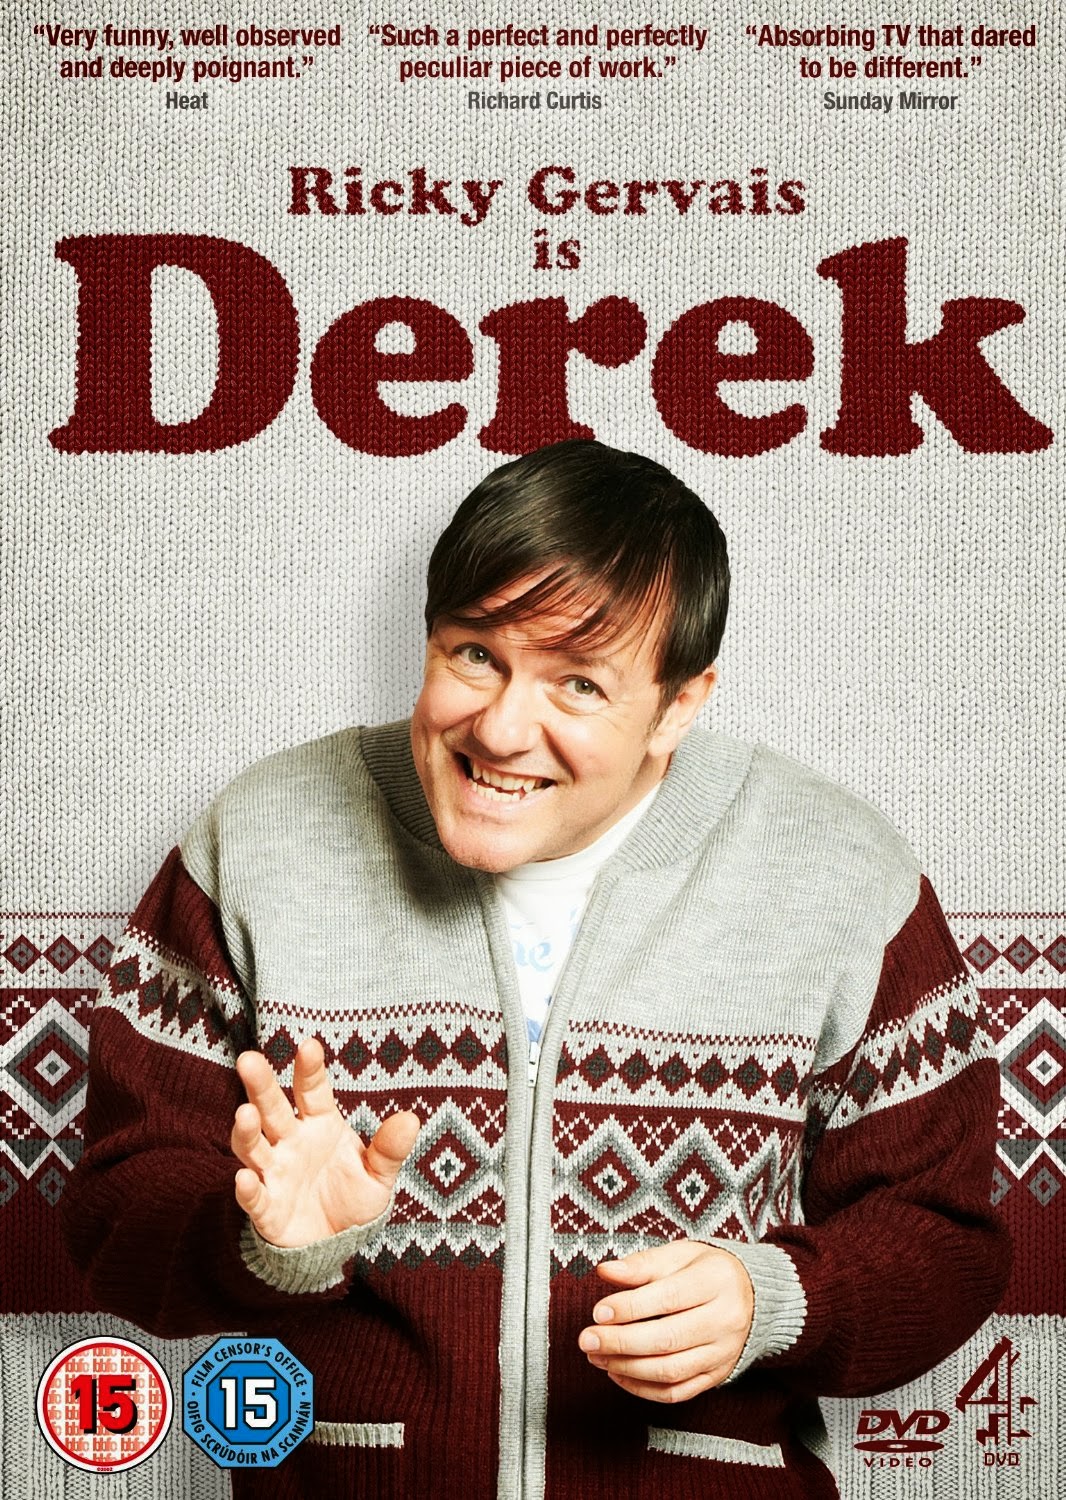 Own Derek Series 1 on DVD and Blu-ray now!